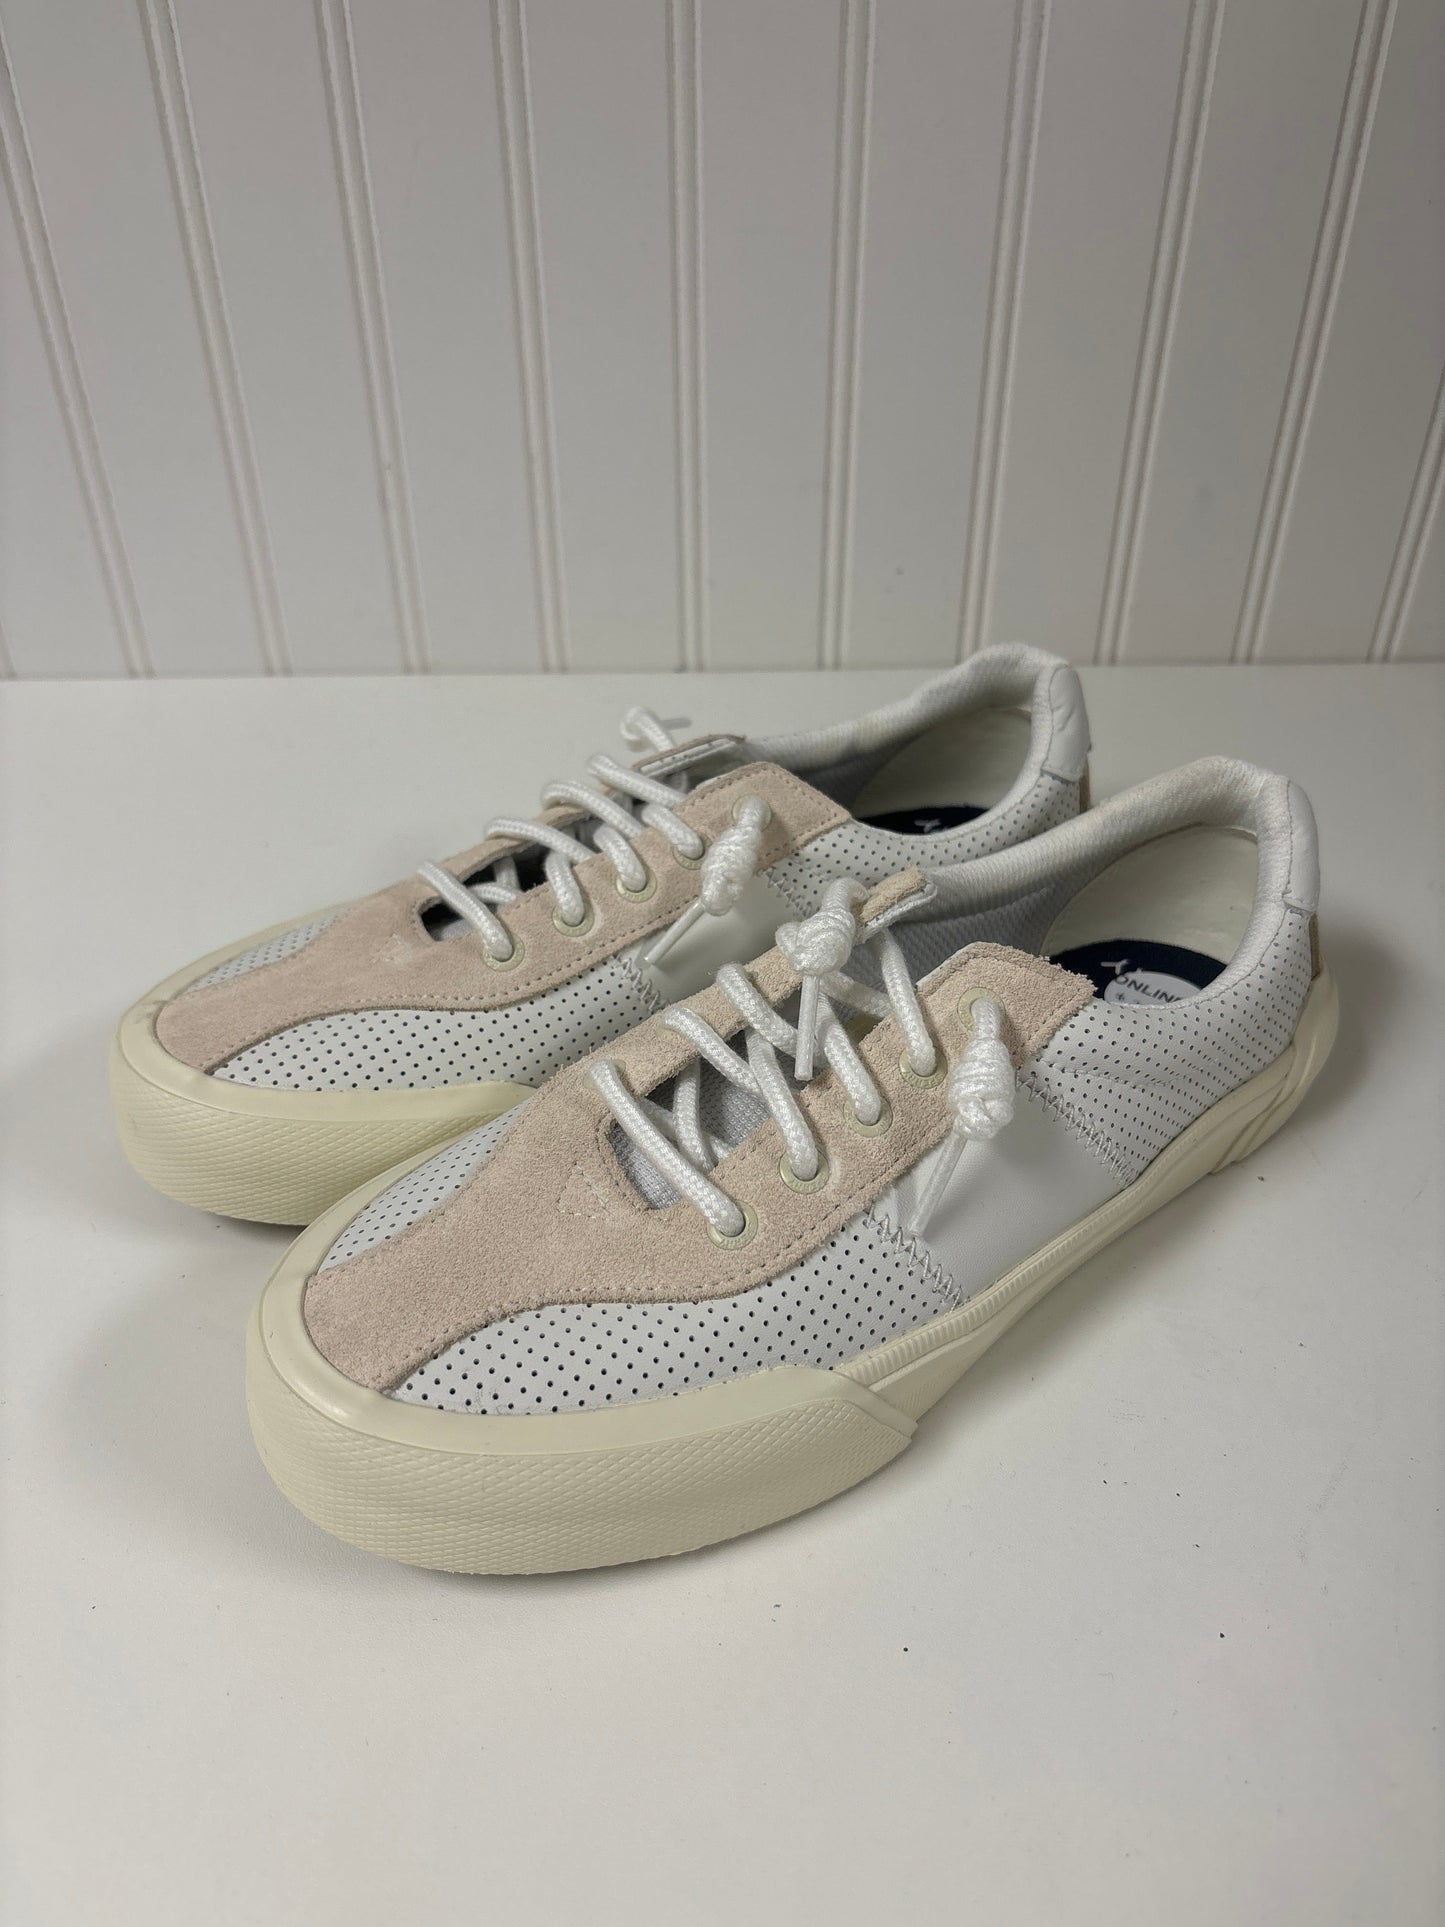 White Shoes Sneakers Sperry, Size 7